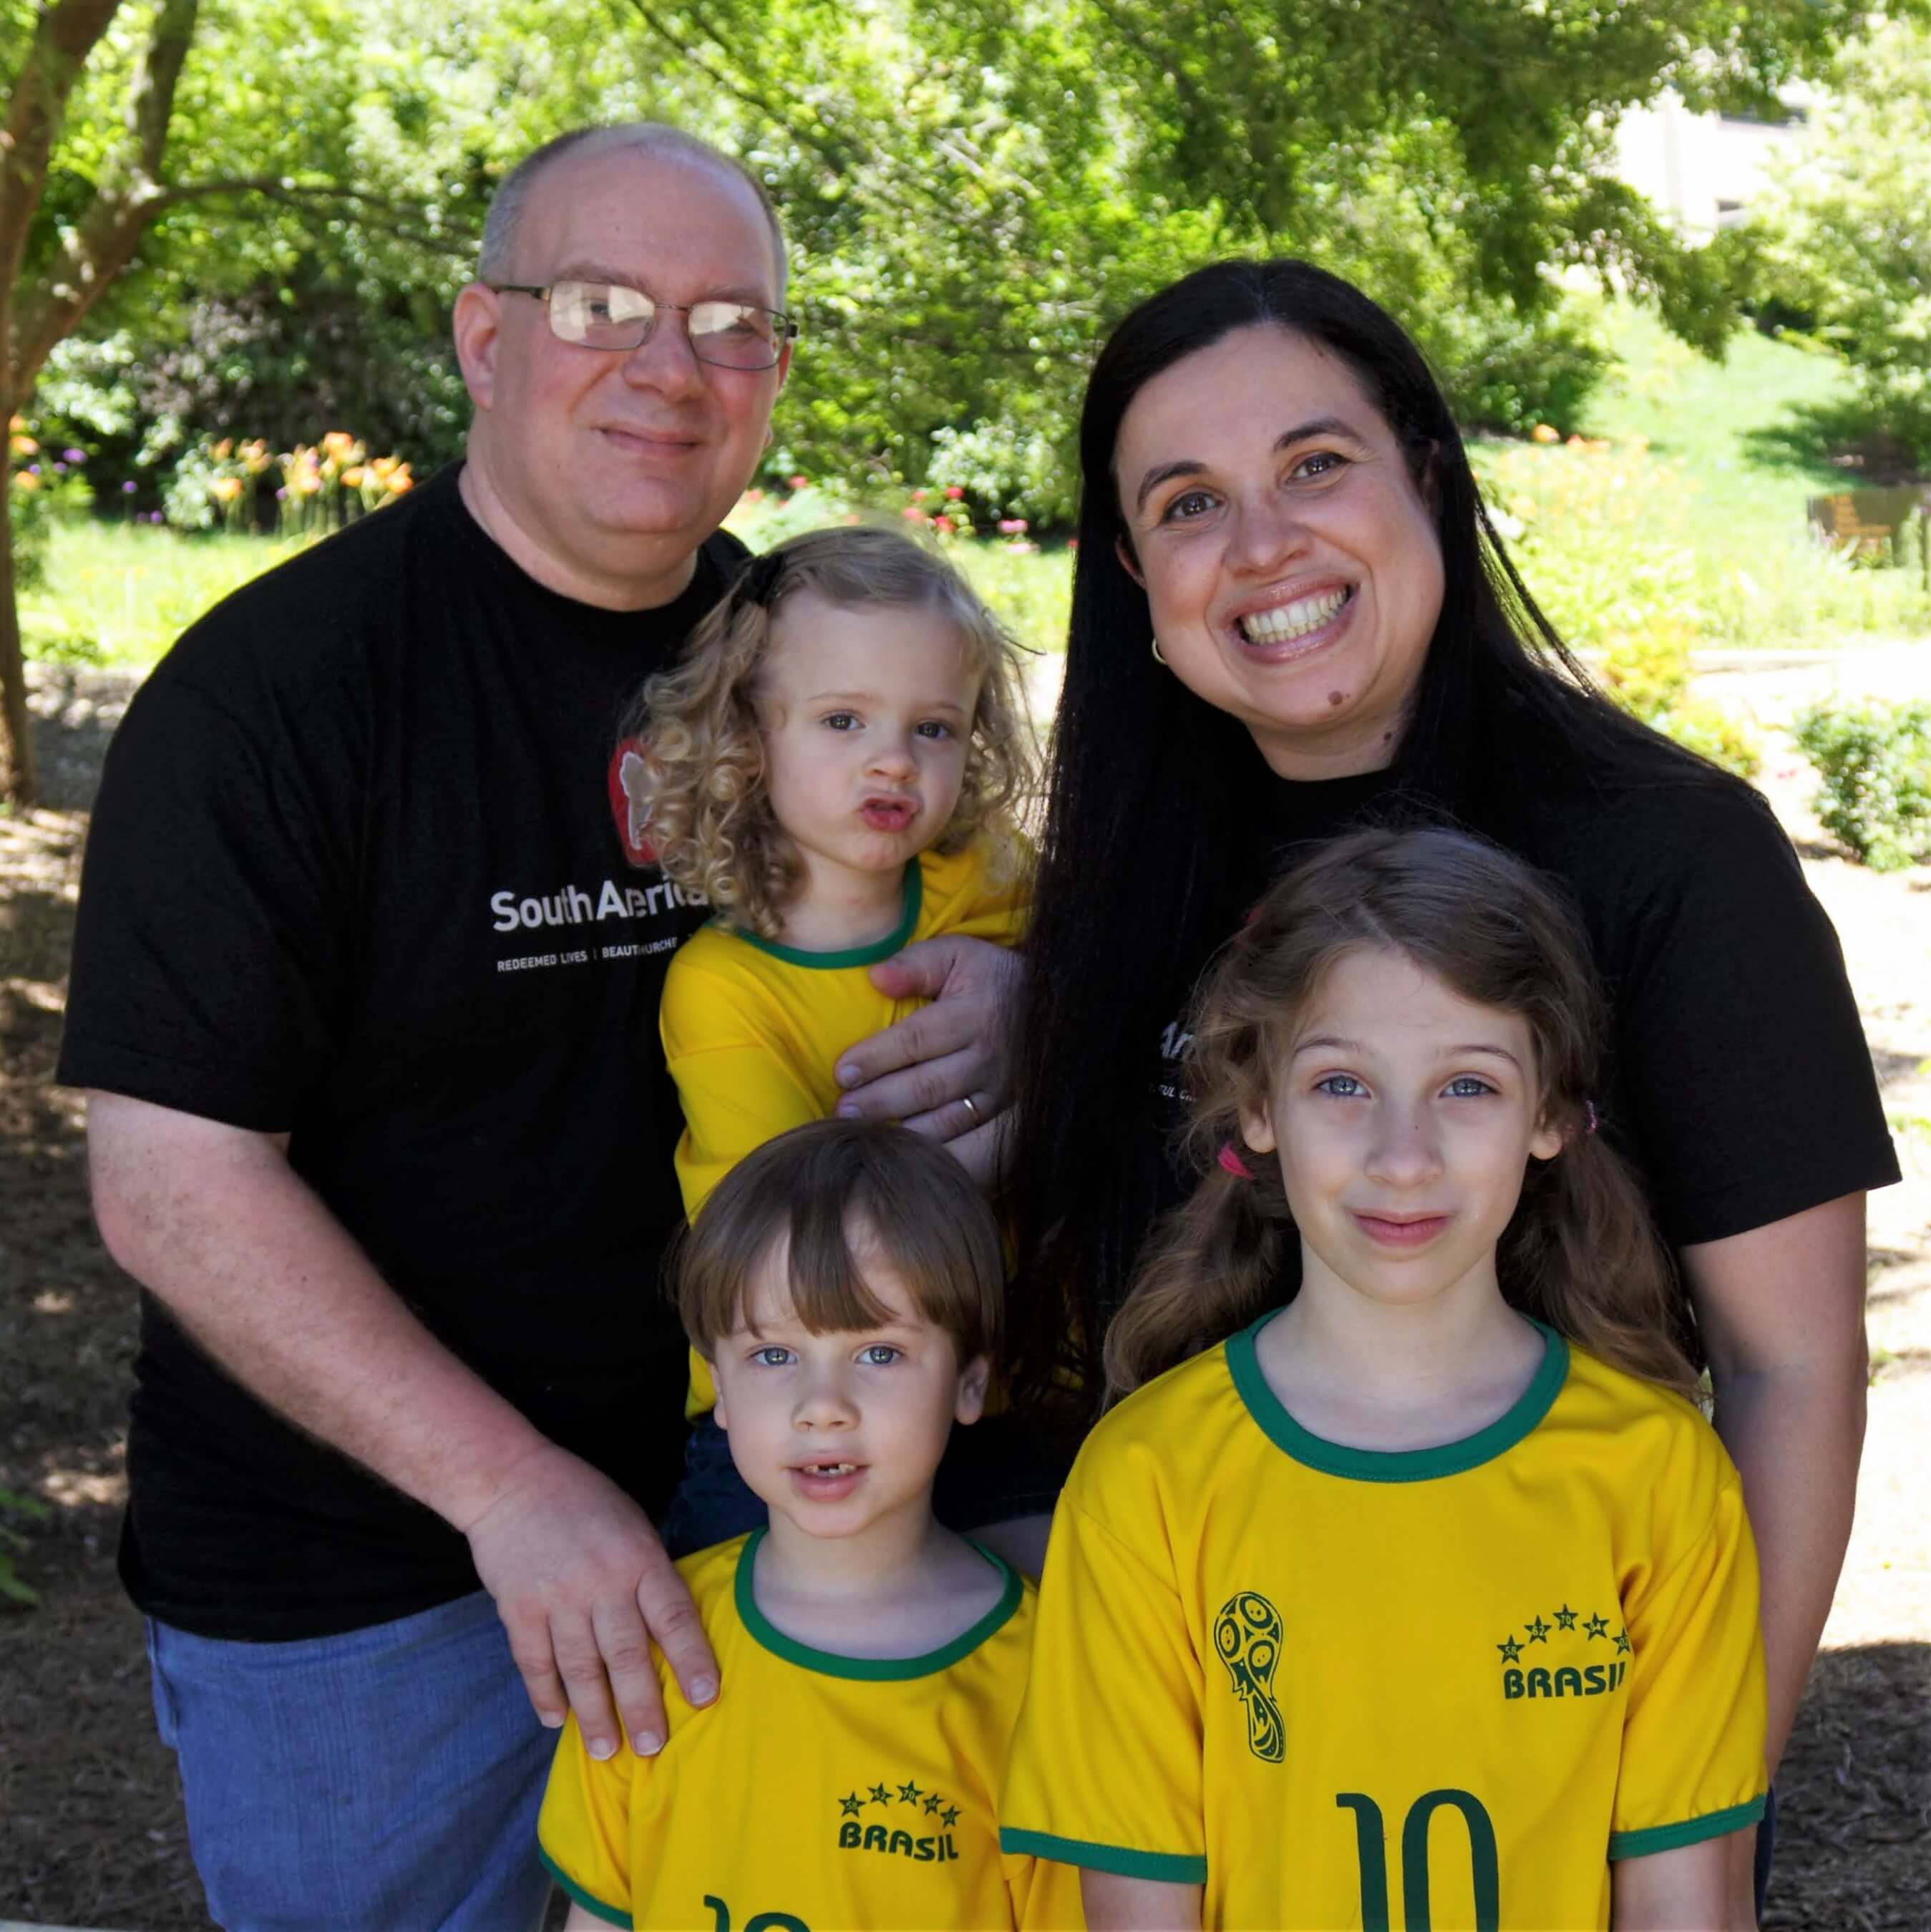 Todd and Erika Carroll serve in Brazil